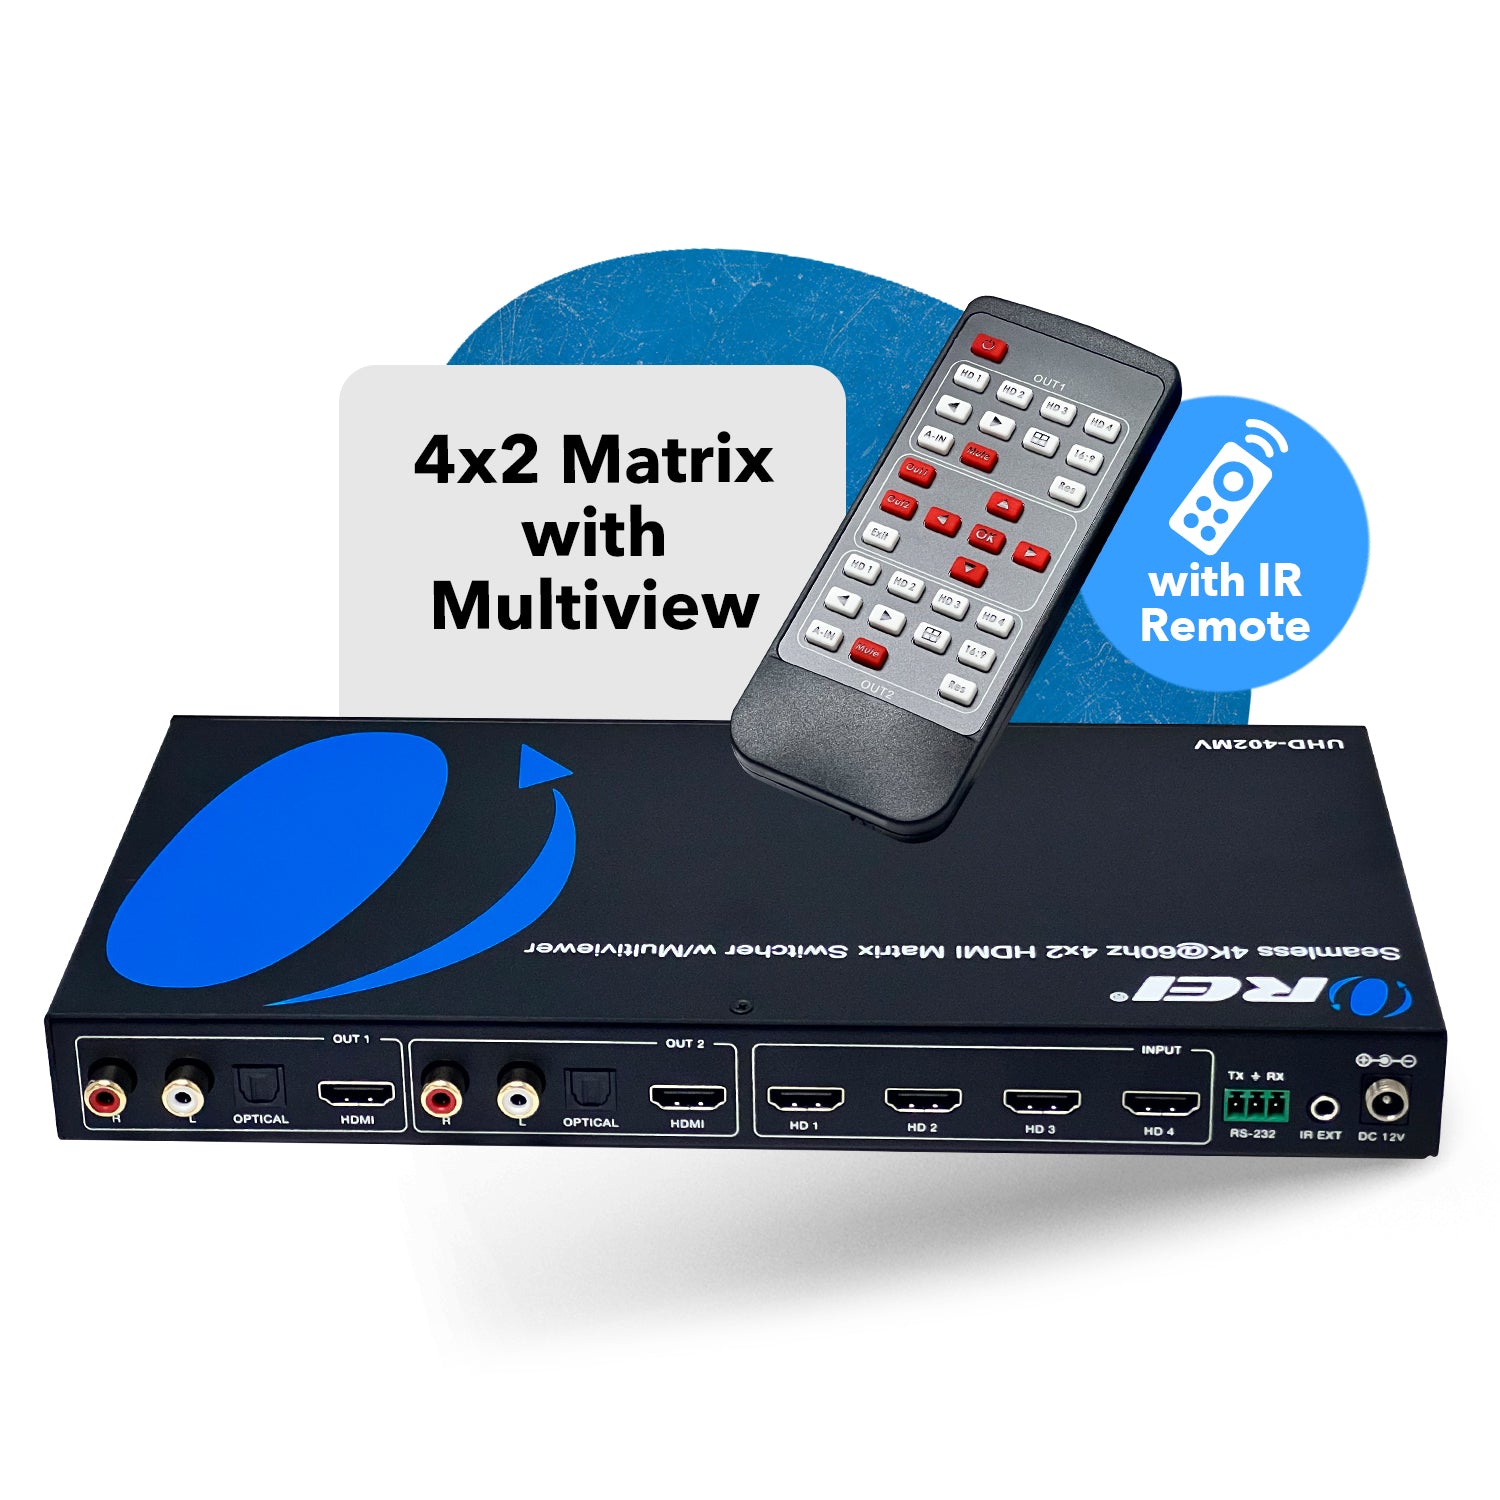 4K HDMI 4X2 Multi-viewer 4 In 2 Out HDMI multiviewer Seamless Switcher 4  picture HDMI